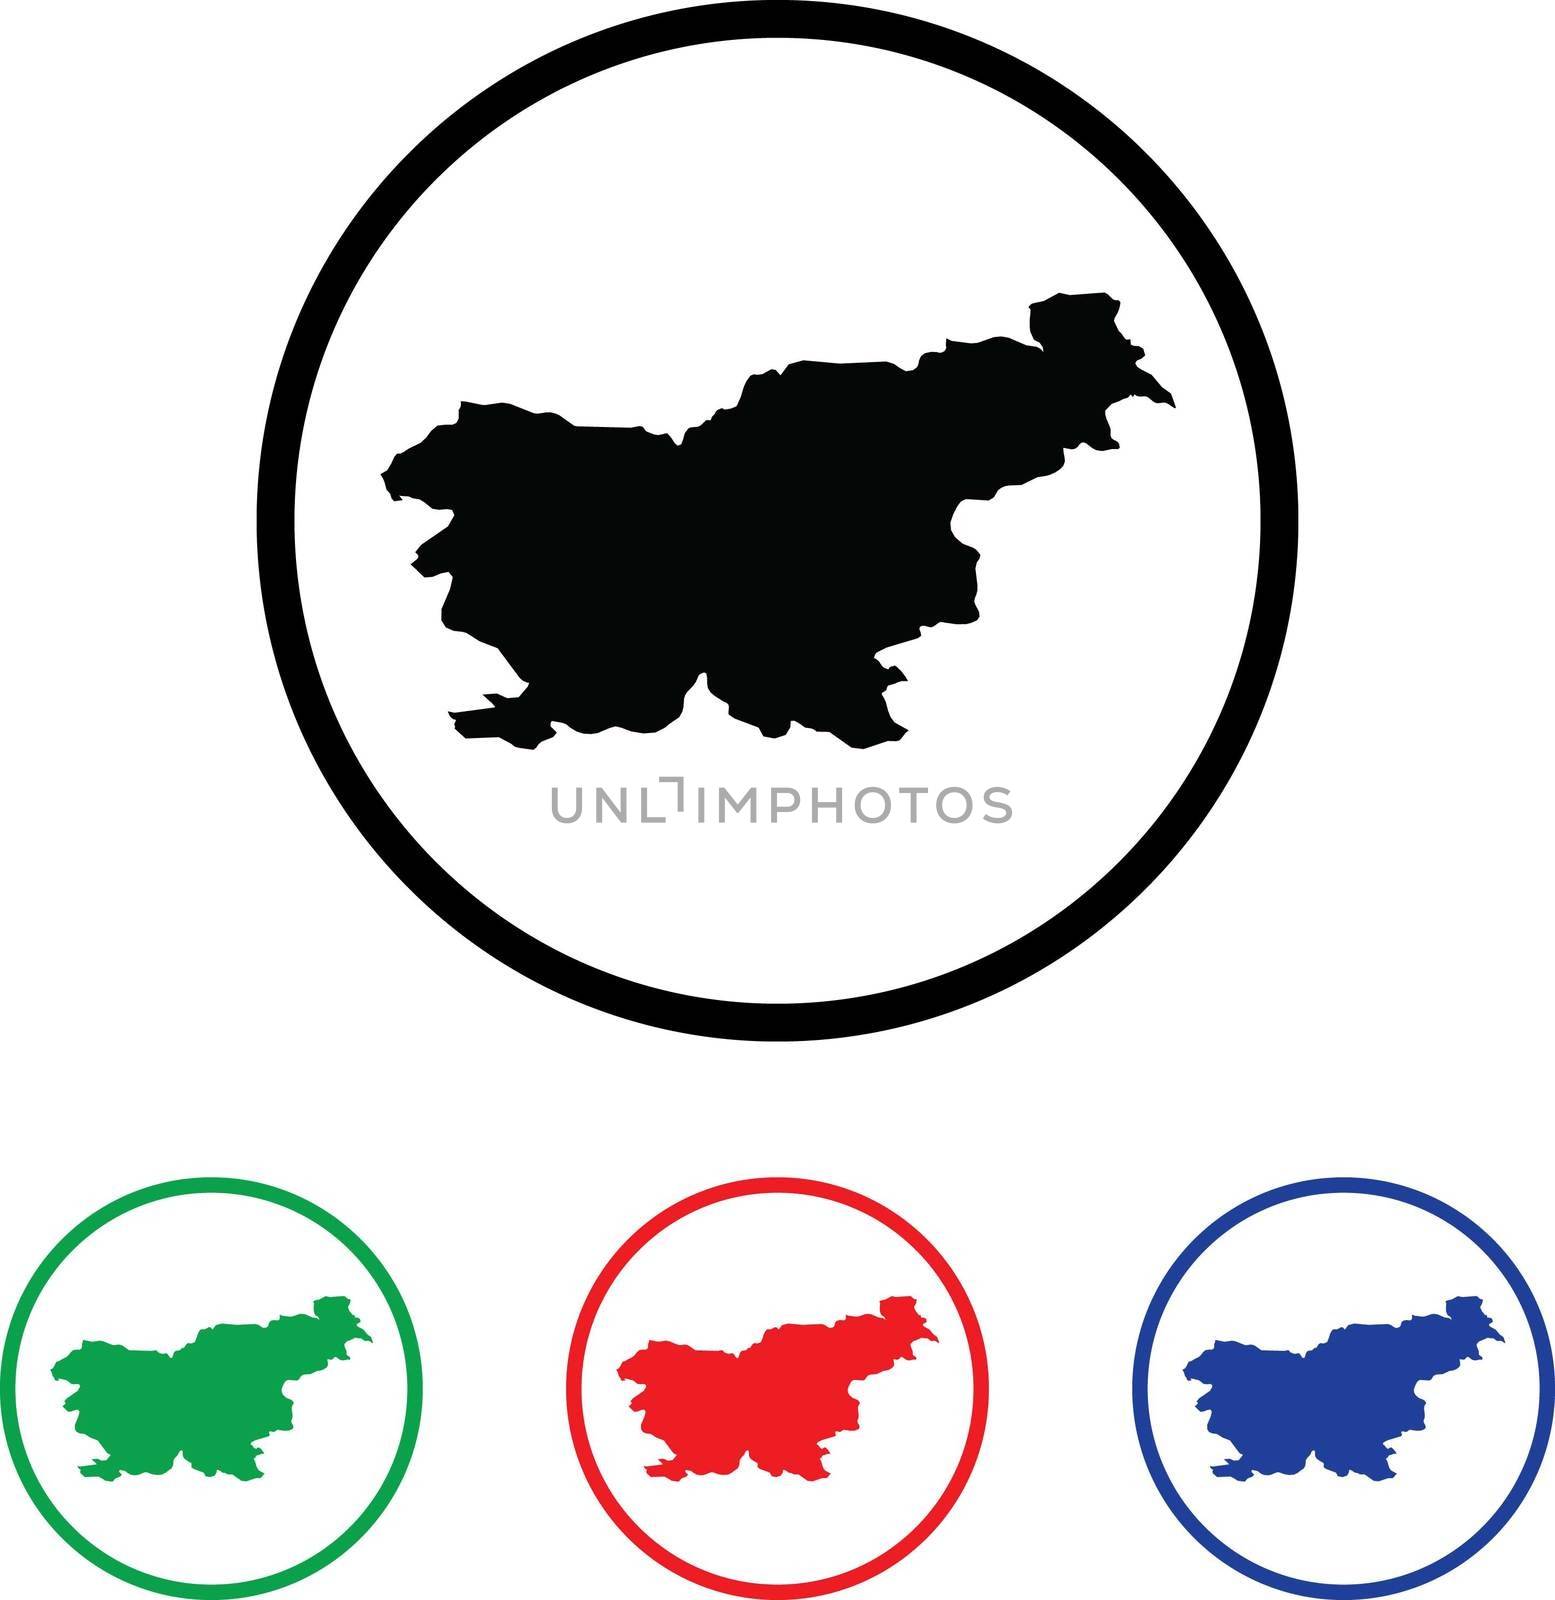 Slovenia Icon Illustration with Four Color Variations